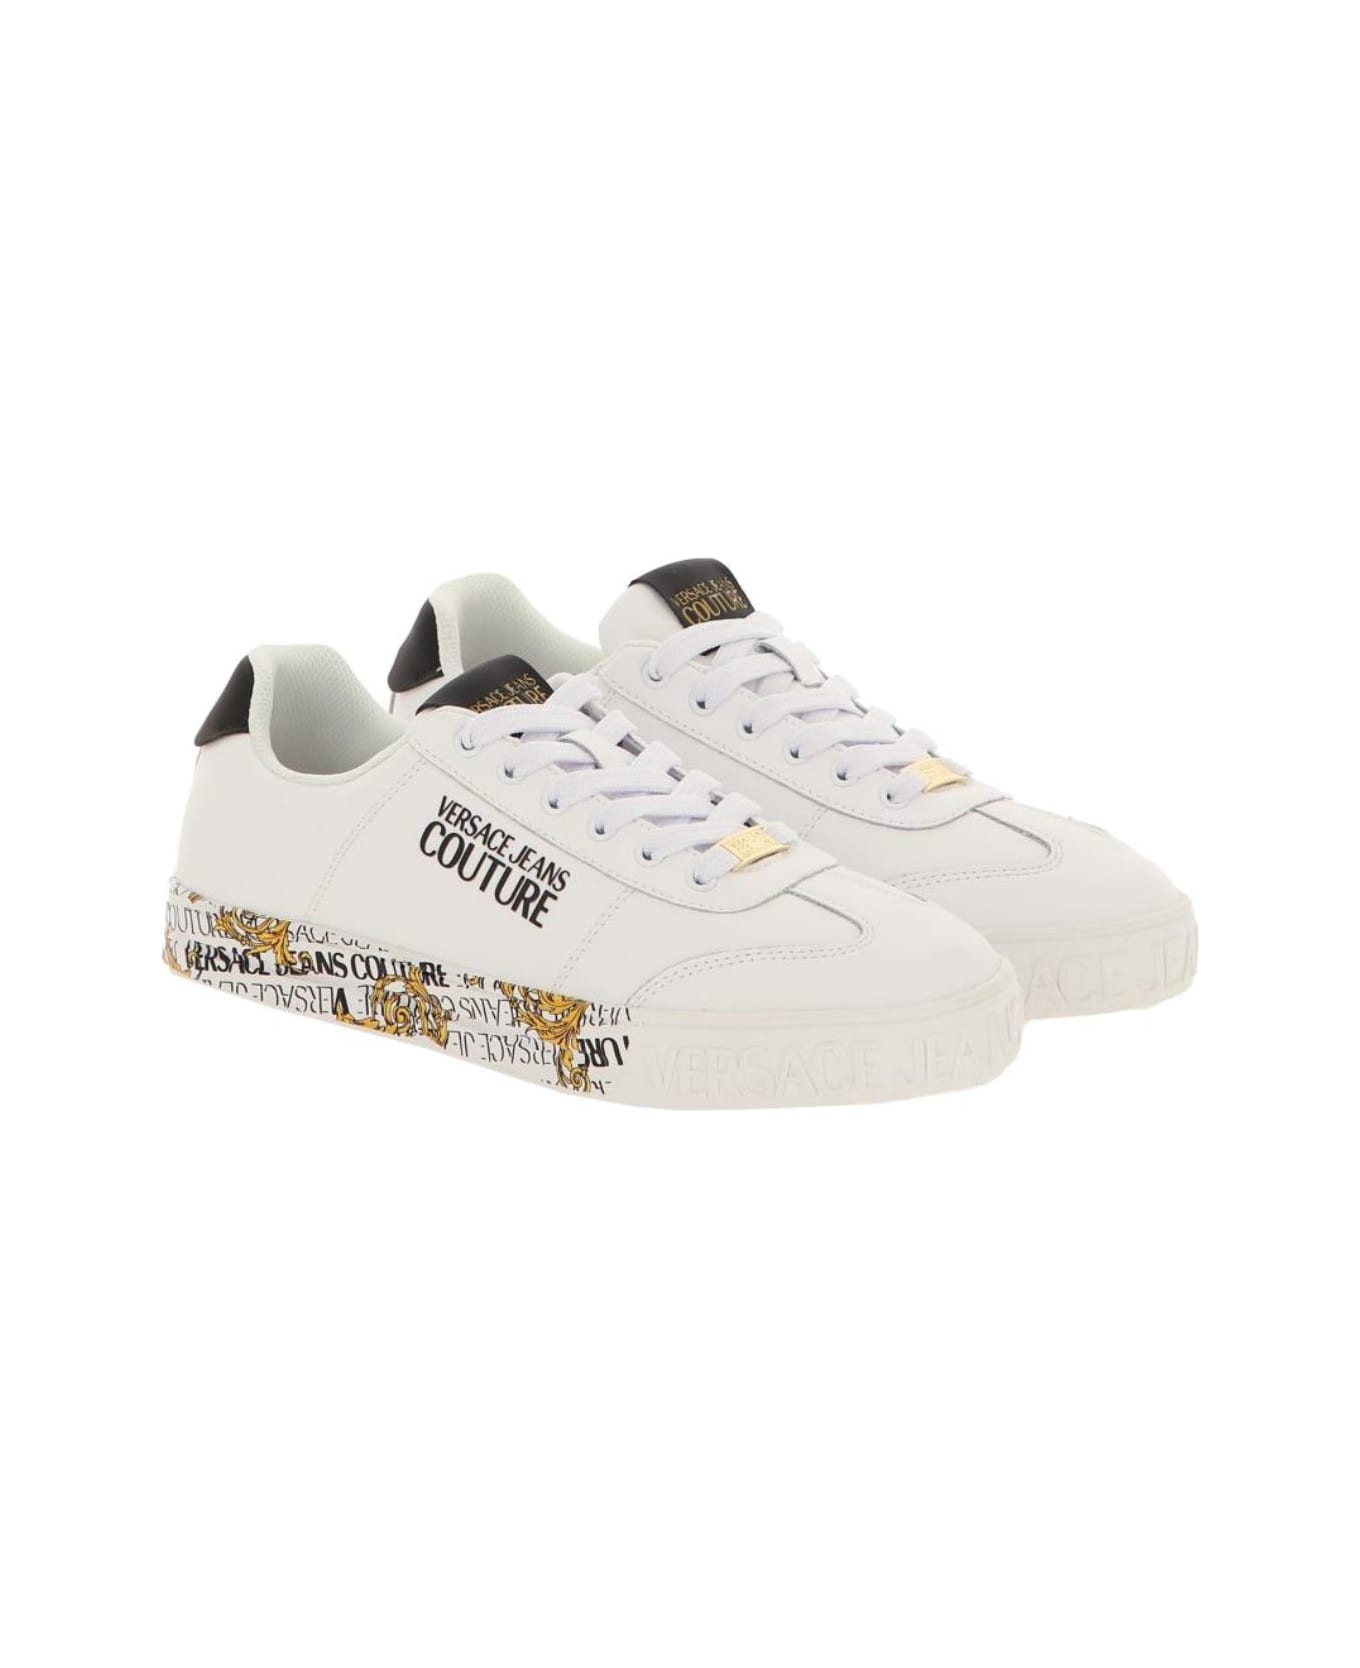 Versace Jeans Couture White Sneakers - White